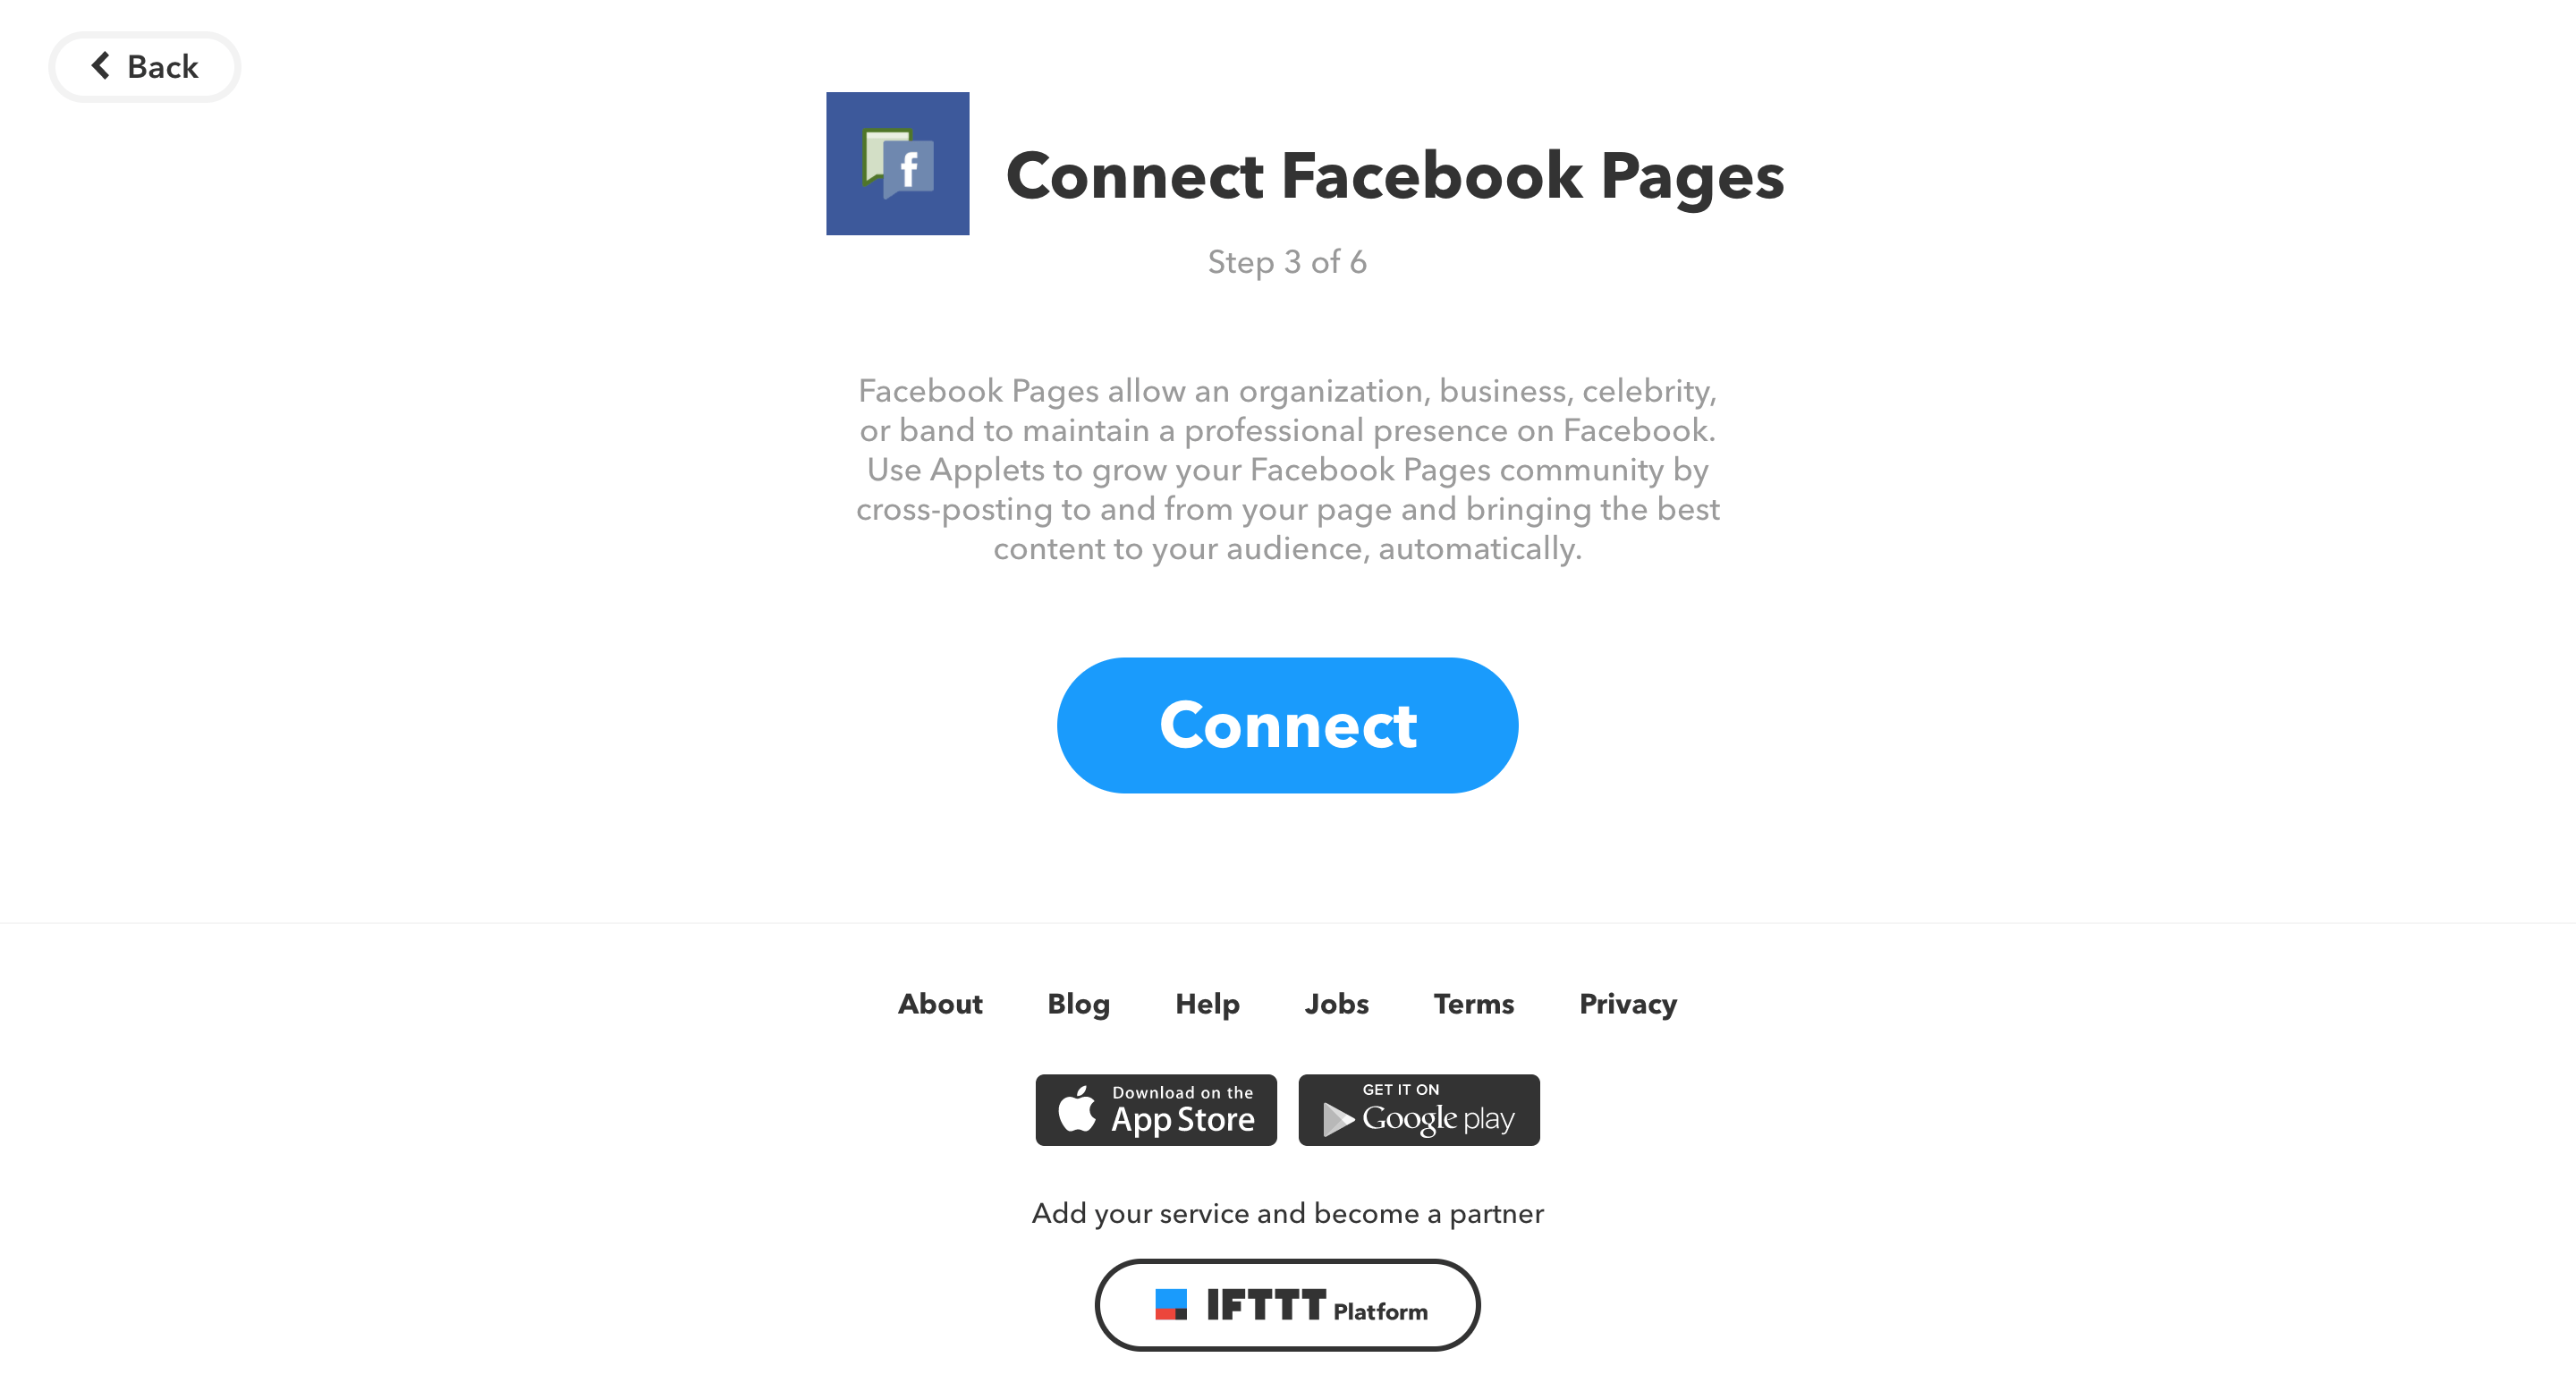 Connect Facebook Pages